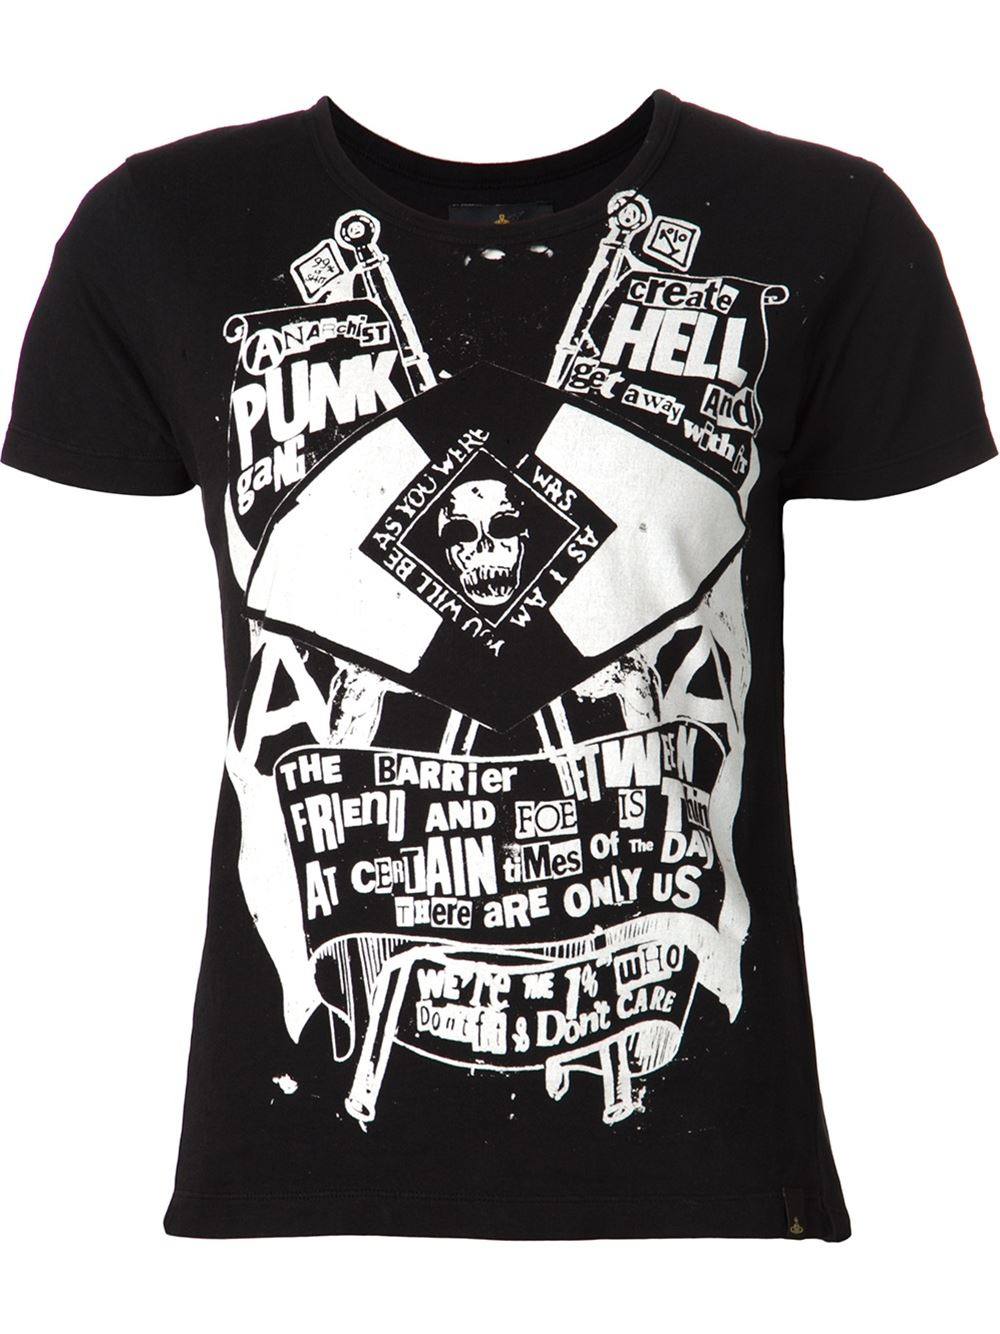 Vivienne Westwood Anglomania Punk Hell Tshirt in Black - Lyst